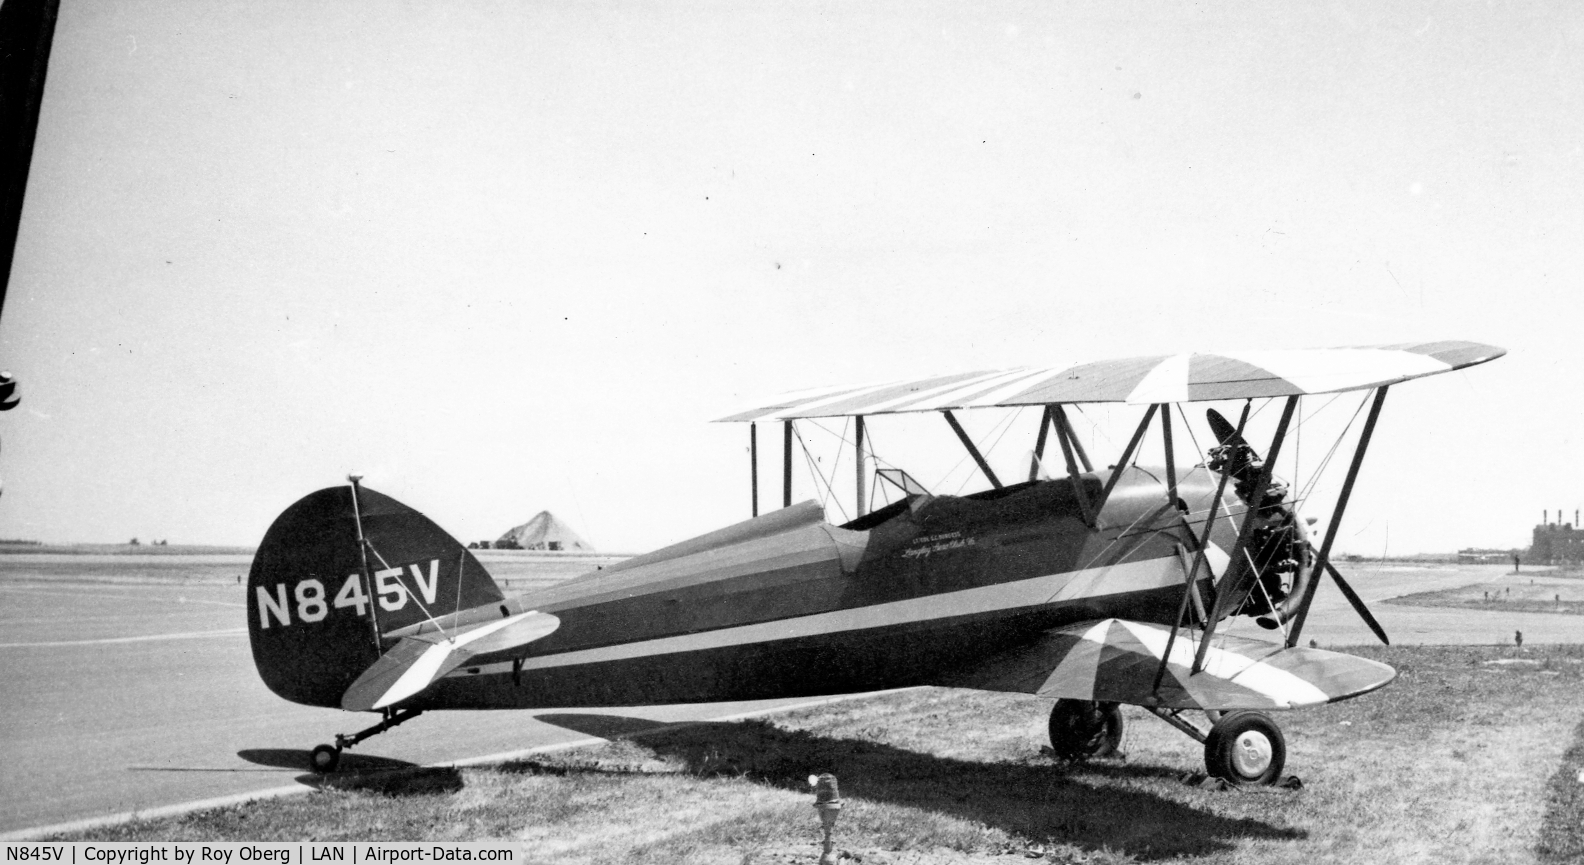 N845V, 1930 Waco CTO C/N 3225, This aircraft was owned by Art Davis.  Purchased by Roy Oberg and Les Steen and then sold to Sam Burgess. This pic was taken after Sam Burgess bought it. You can see see his name on the cockpit. 